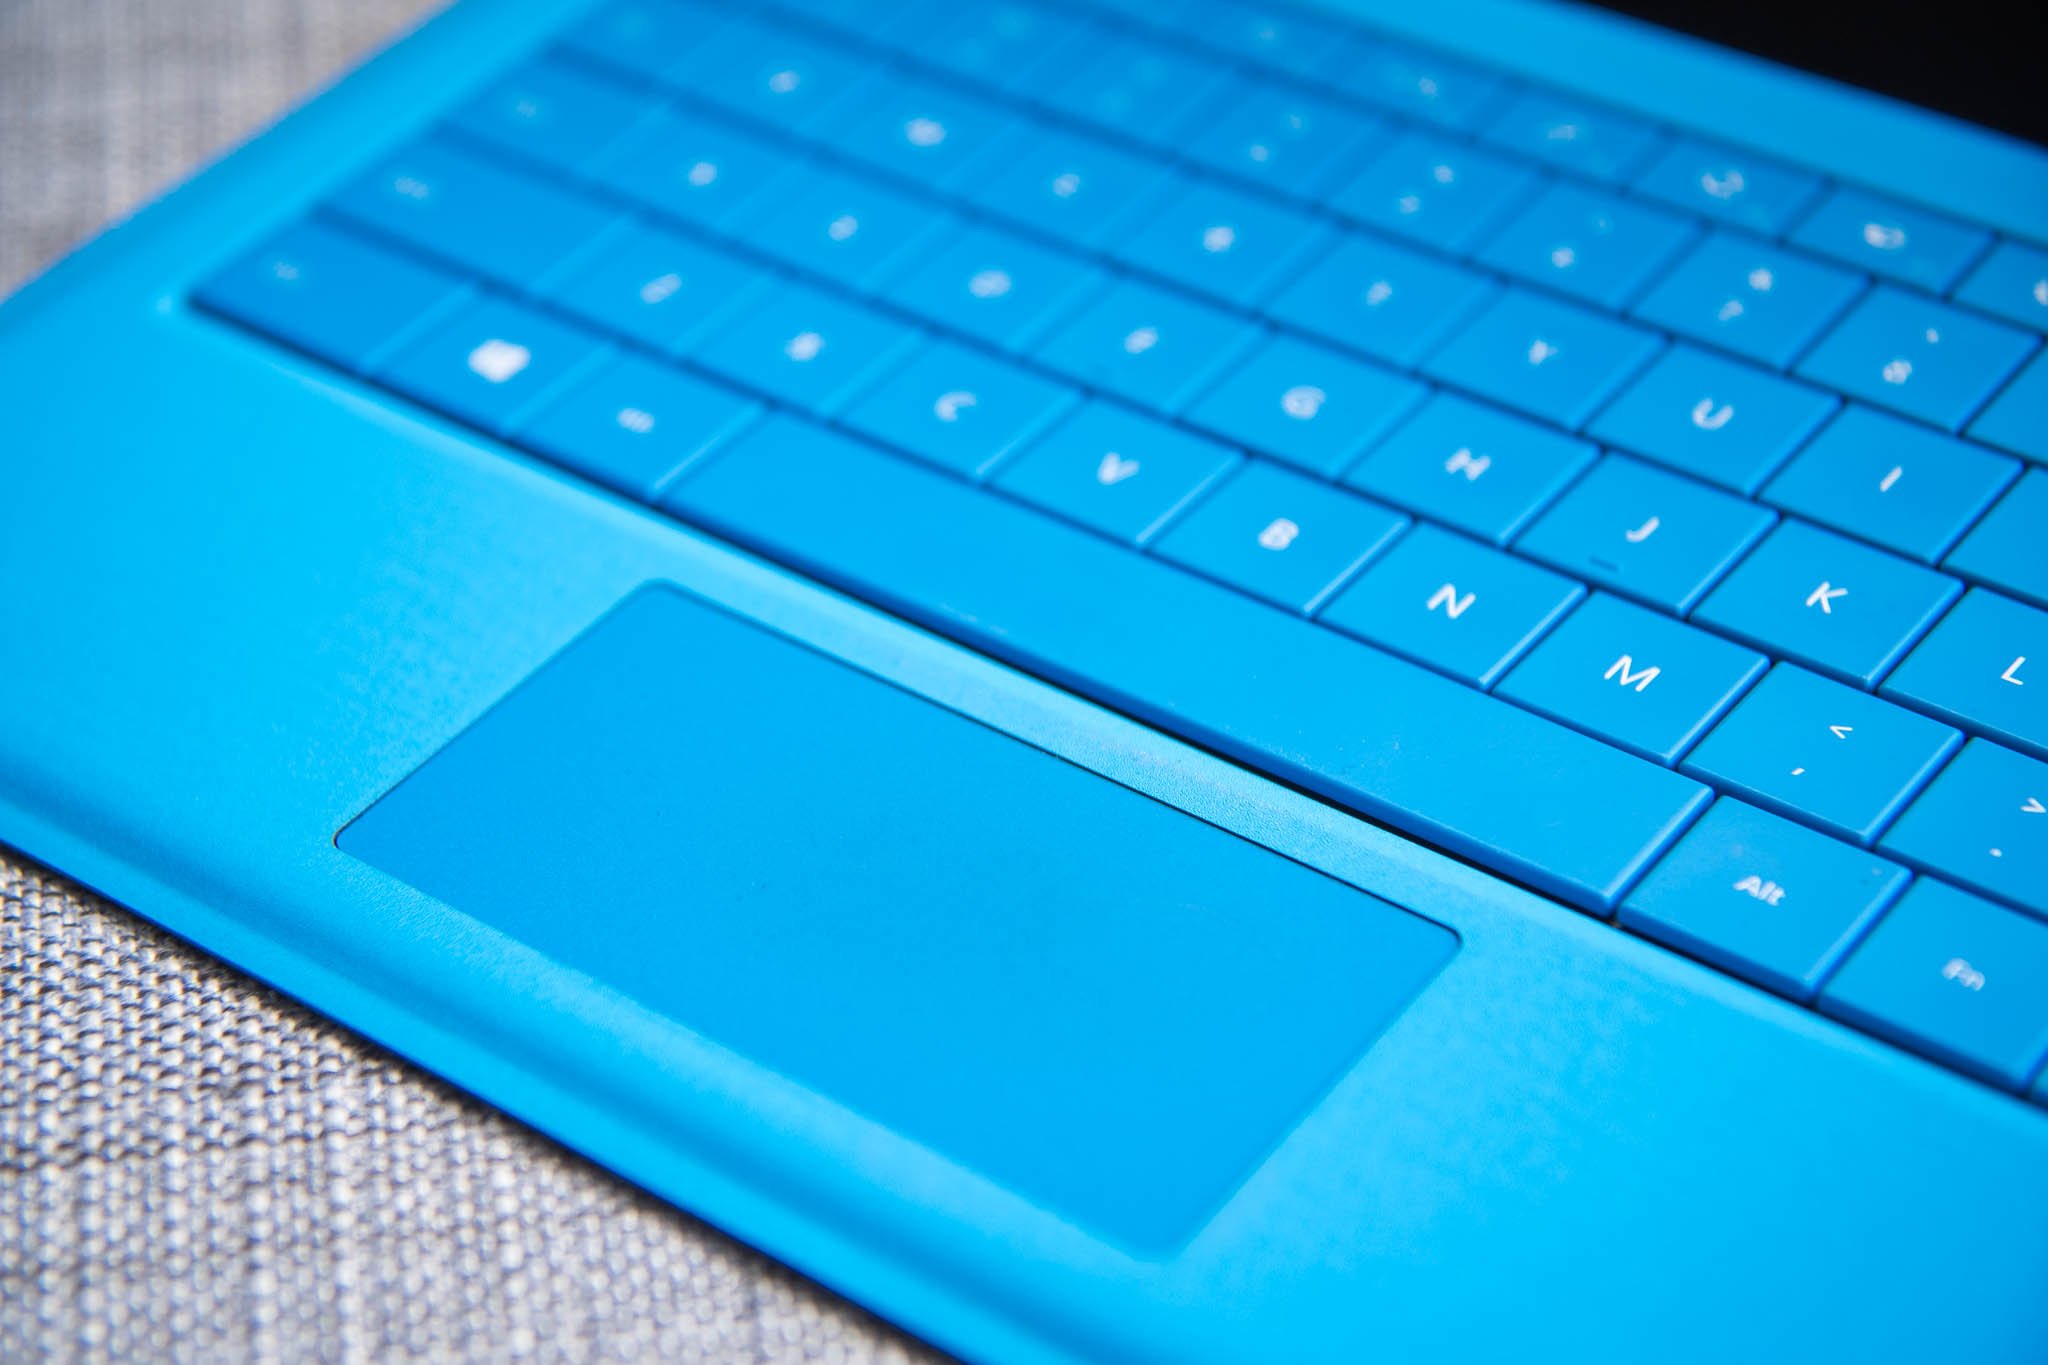 surface-pro-3-touchpad.jpg